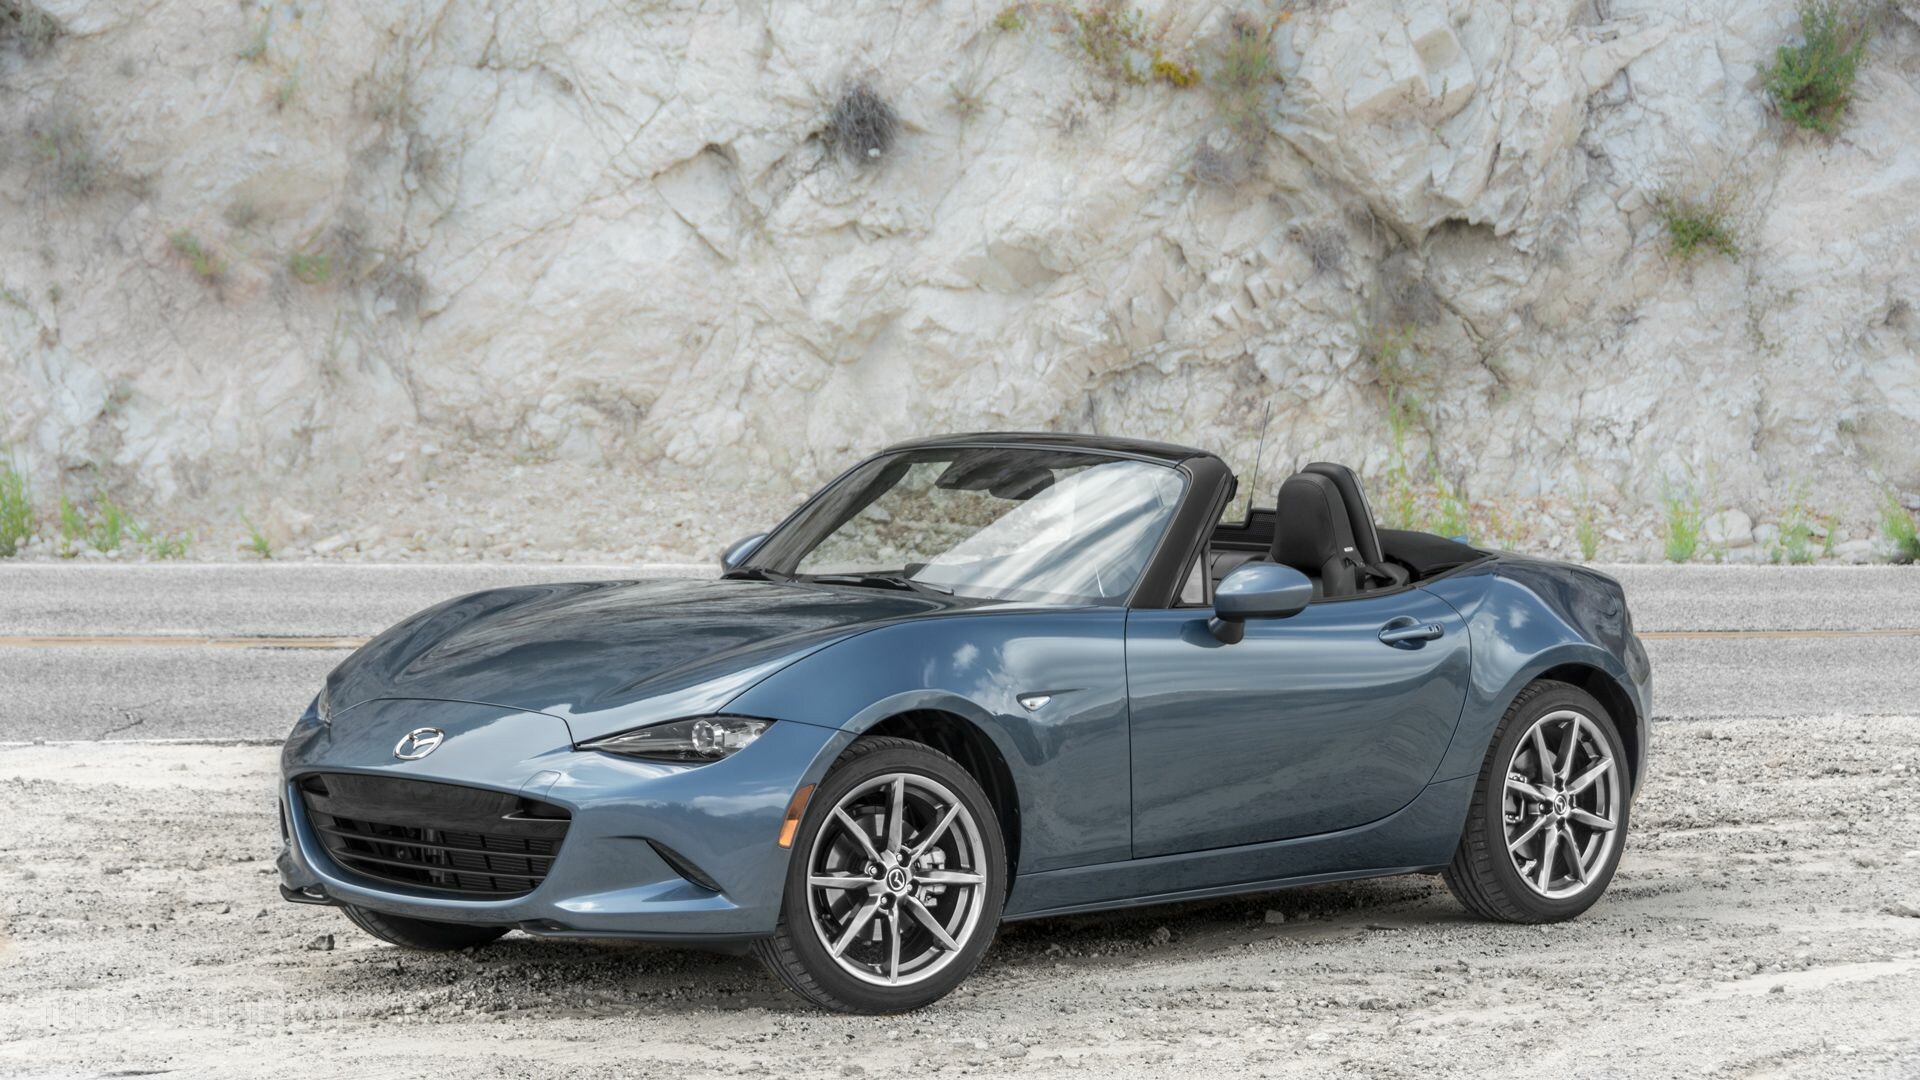 Mazda MX-5 Miata: The best-selling two-seat convertible sports car in history. 1920x1080 Full HD Background.